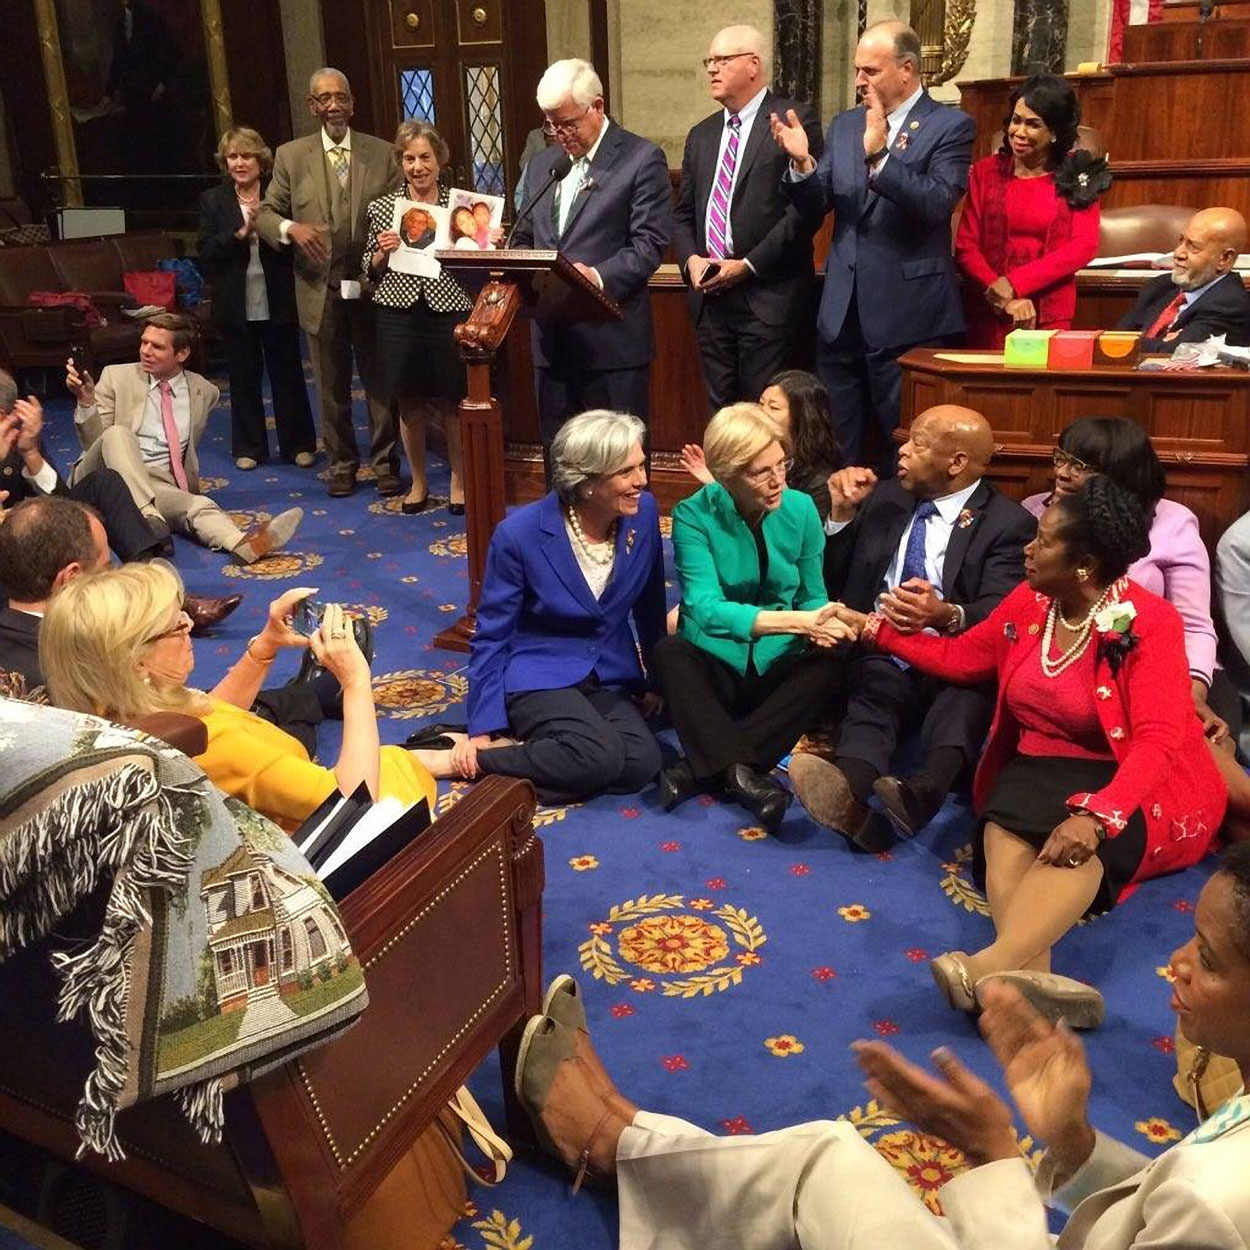 Democrats staged a 24-hour sit-in on the House floor in an effort to force a vote on gun control. (Photo: John Lewis/ZUMA Press/Newscom)